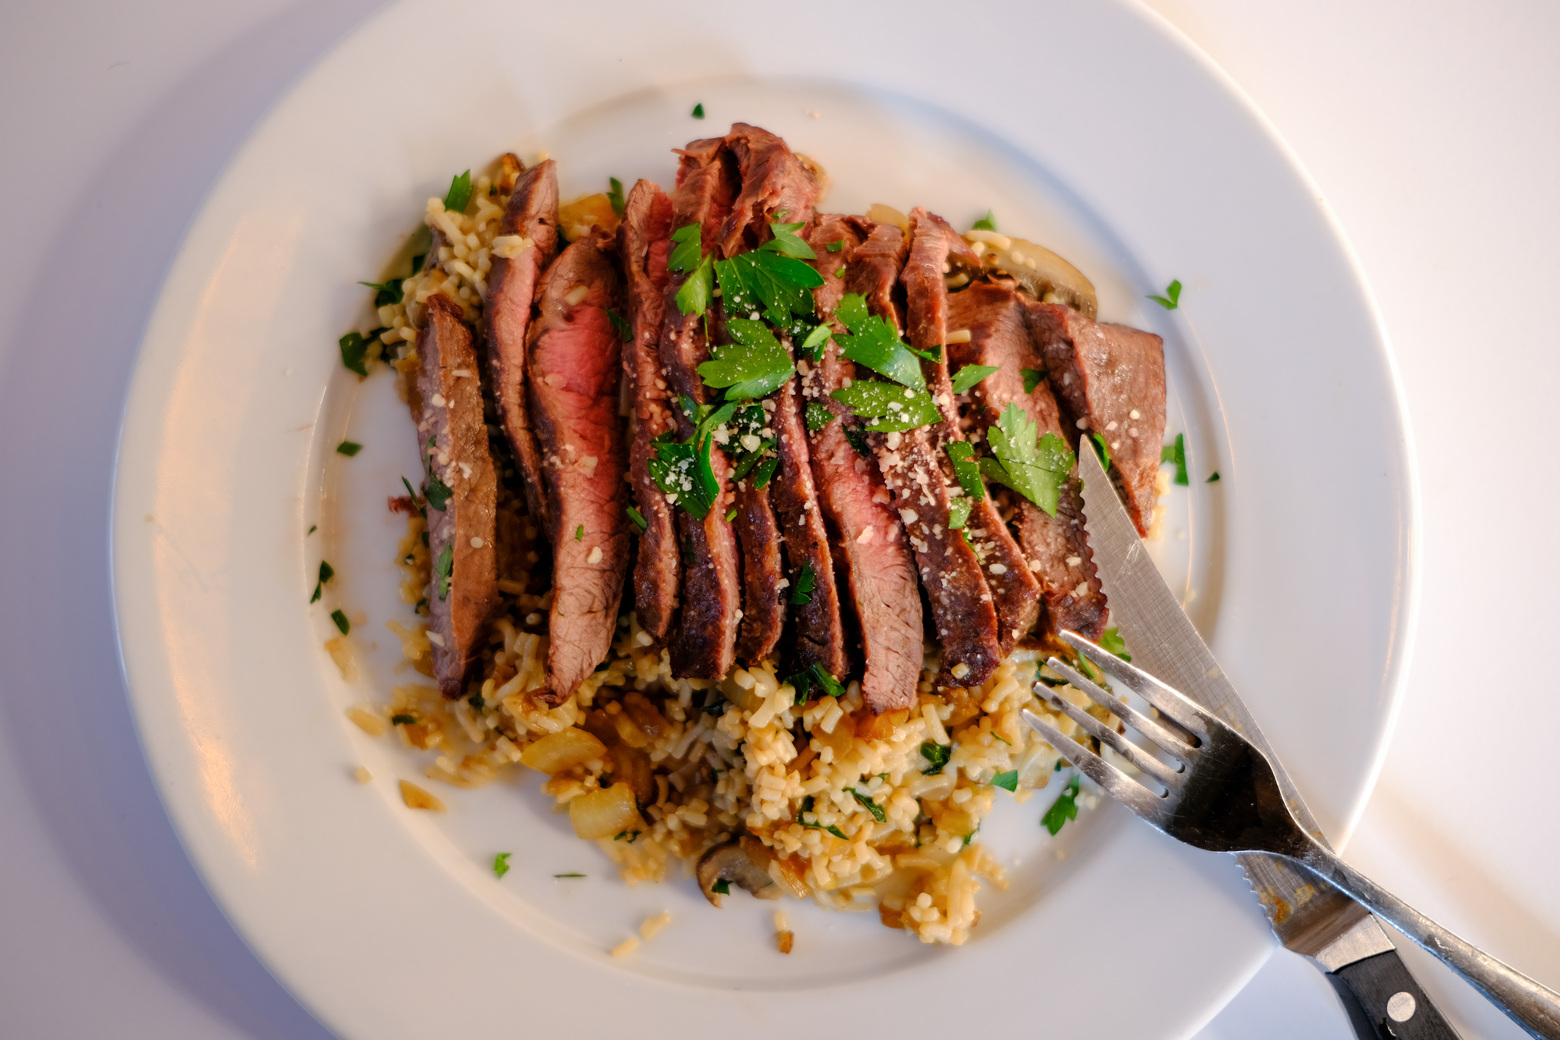 Slices of medium-rare steak served over a bed of low-carb rice with mushrooms.